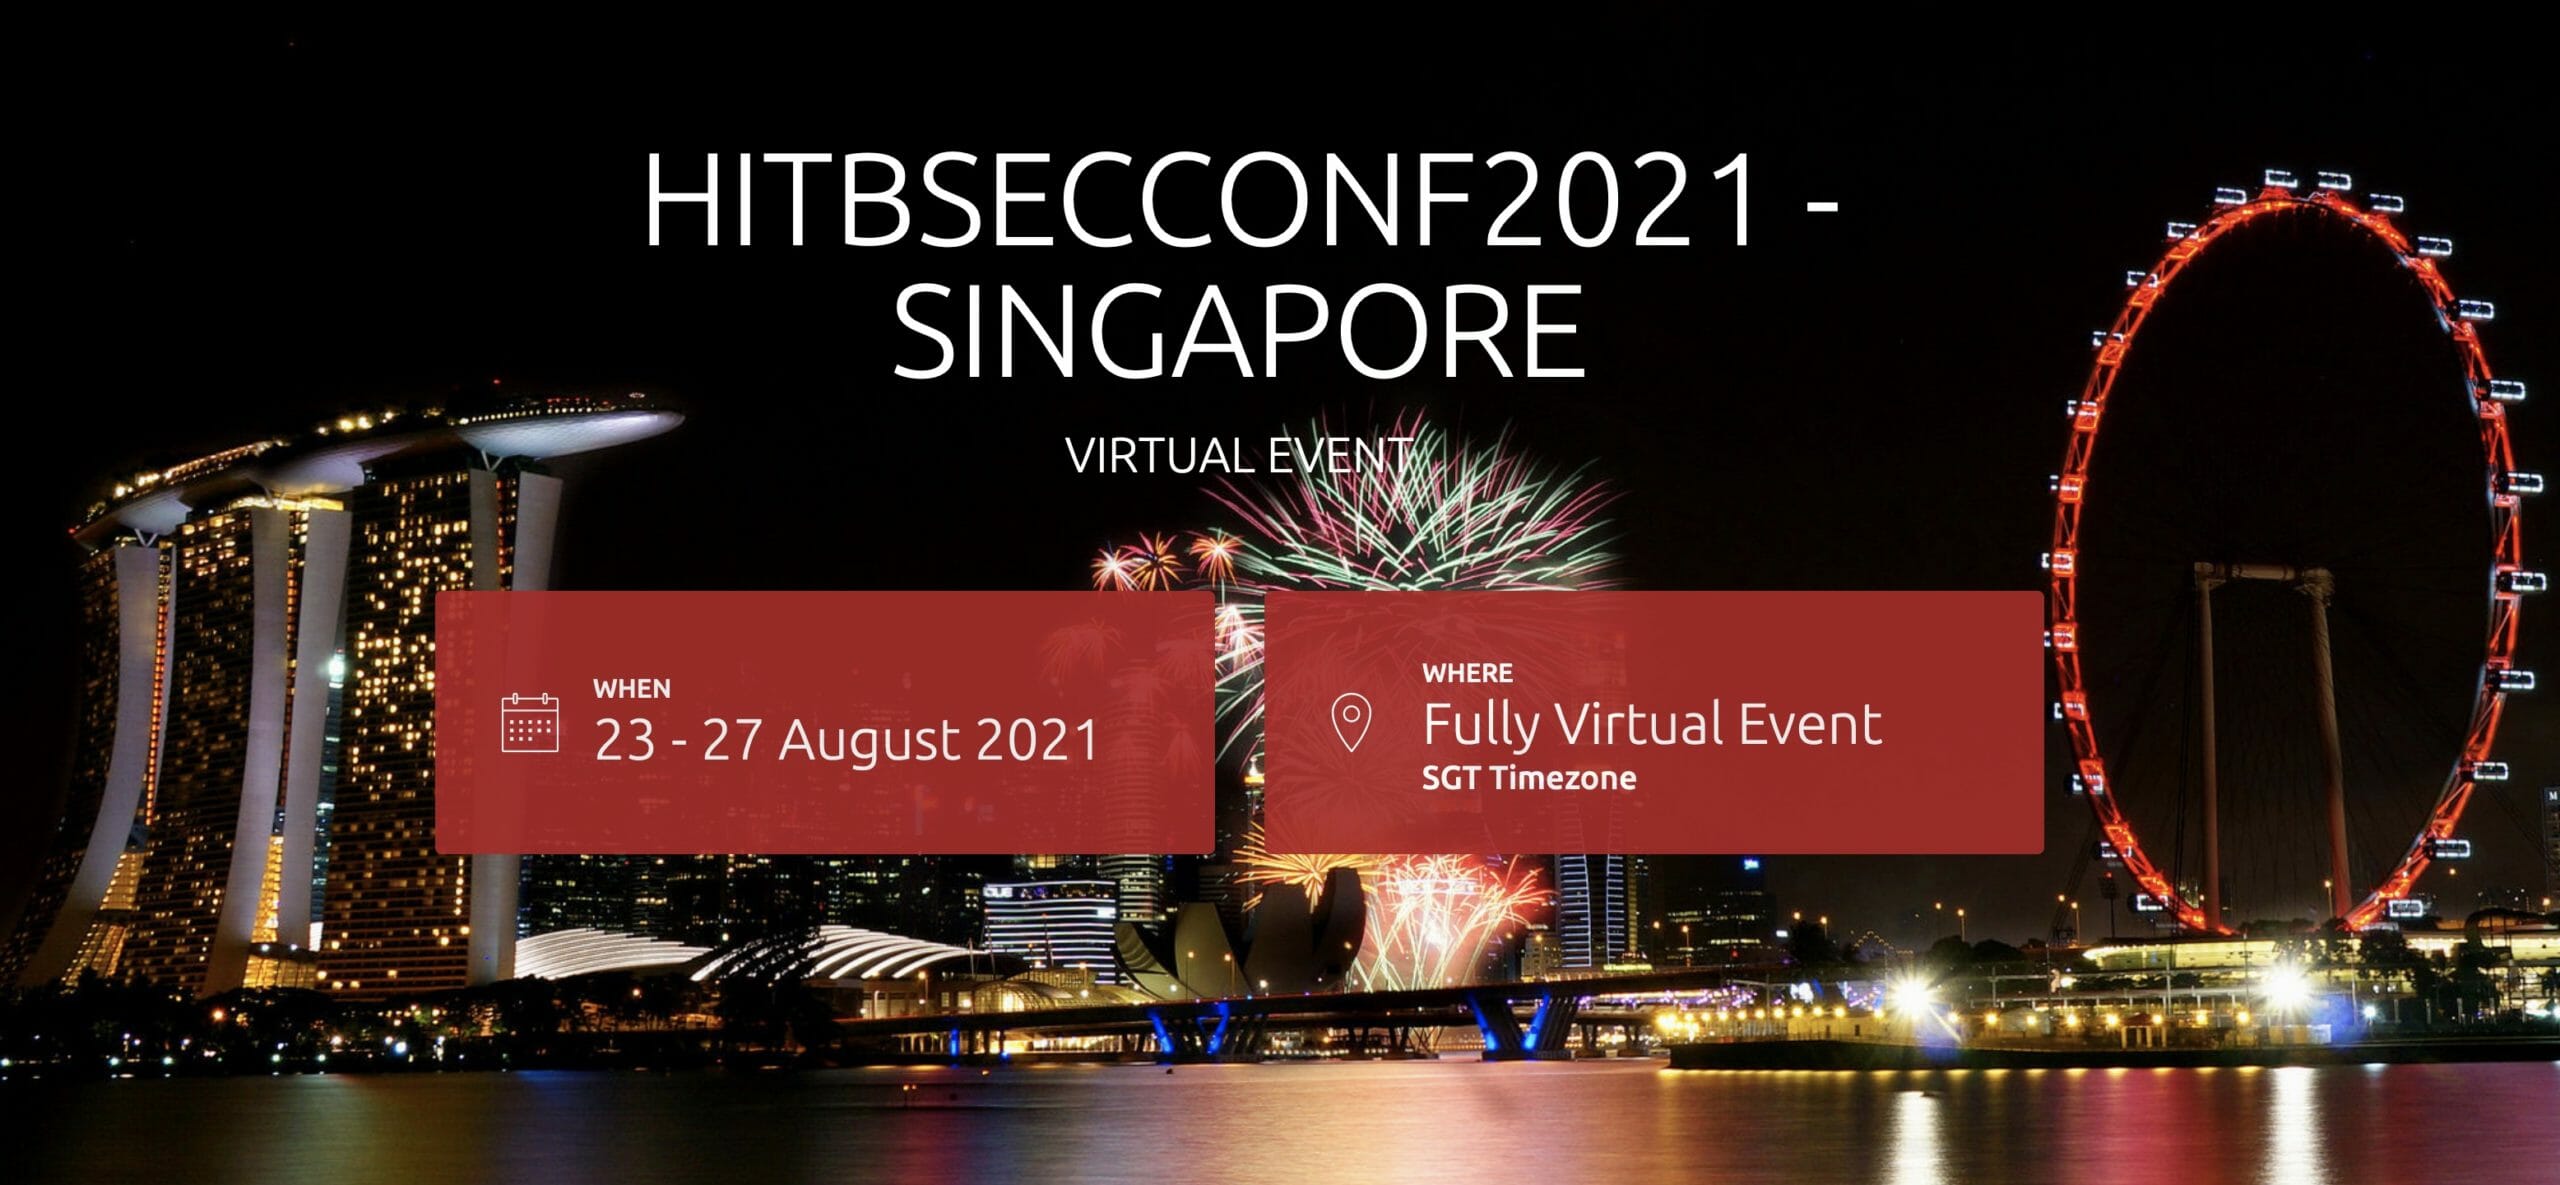 HITBSECCONF2021 – SINGAPORE